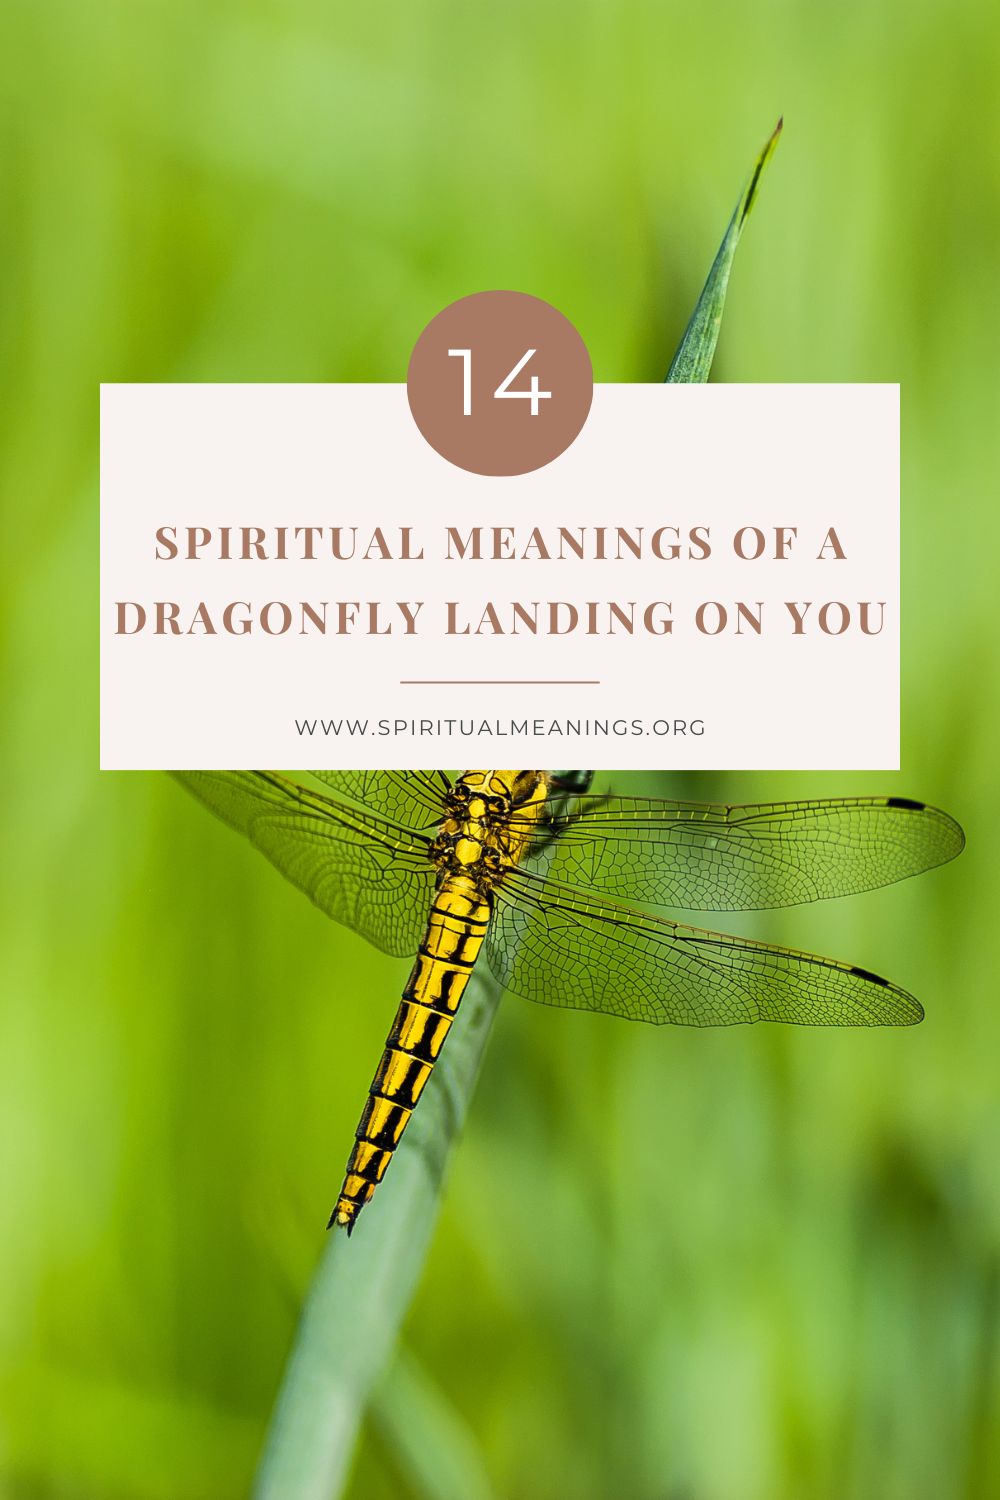 Dragonfly Myths & Spiritual Meanings